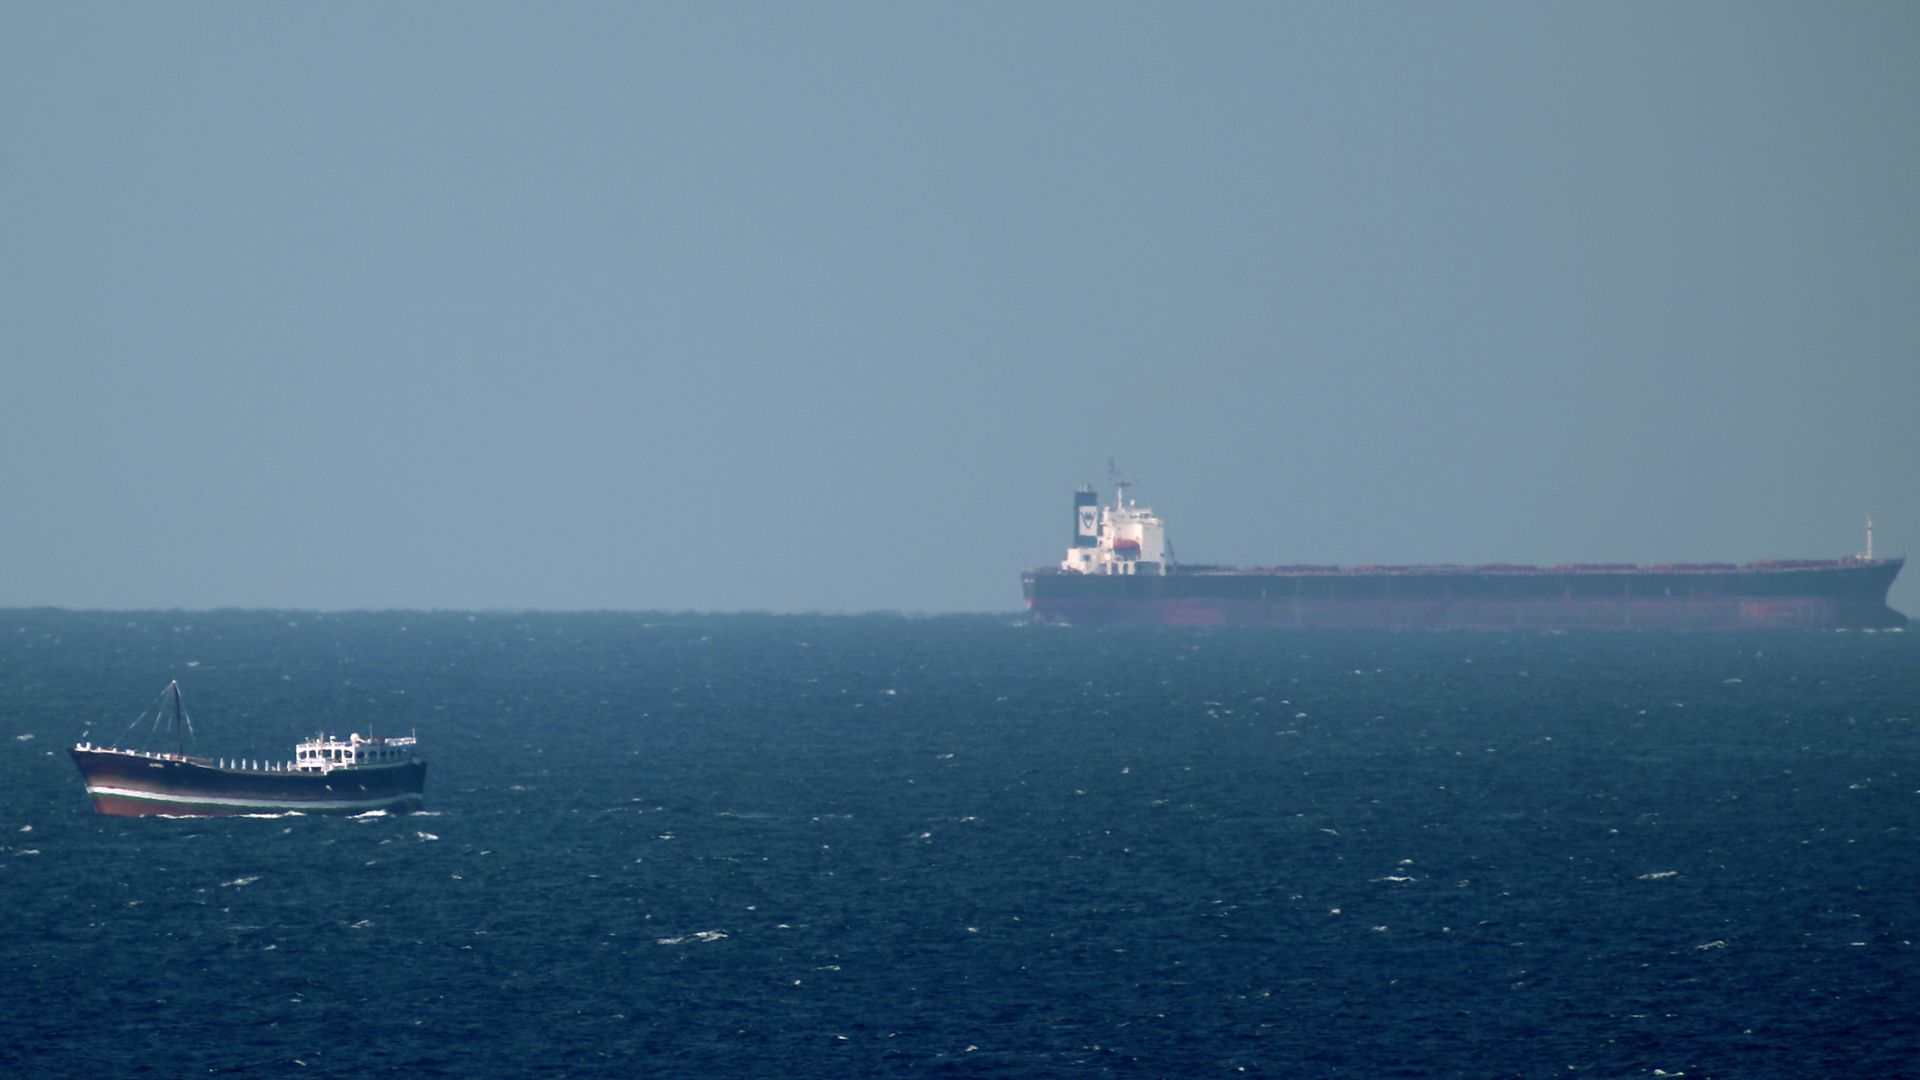 U.S. Navy assists 2 oil tankers in Oman Sea after reports of explosion - Axios1920 x 1080